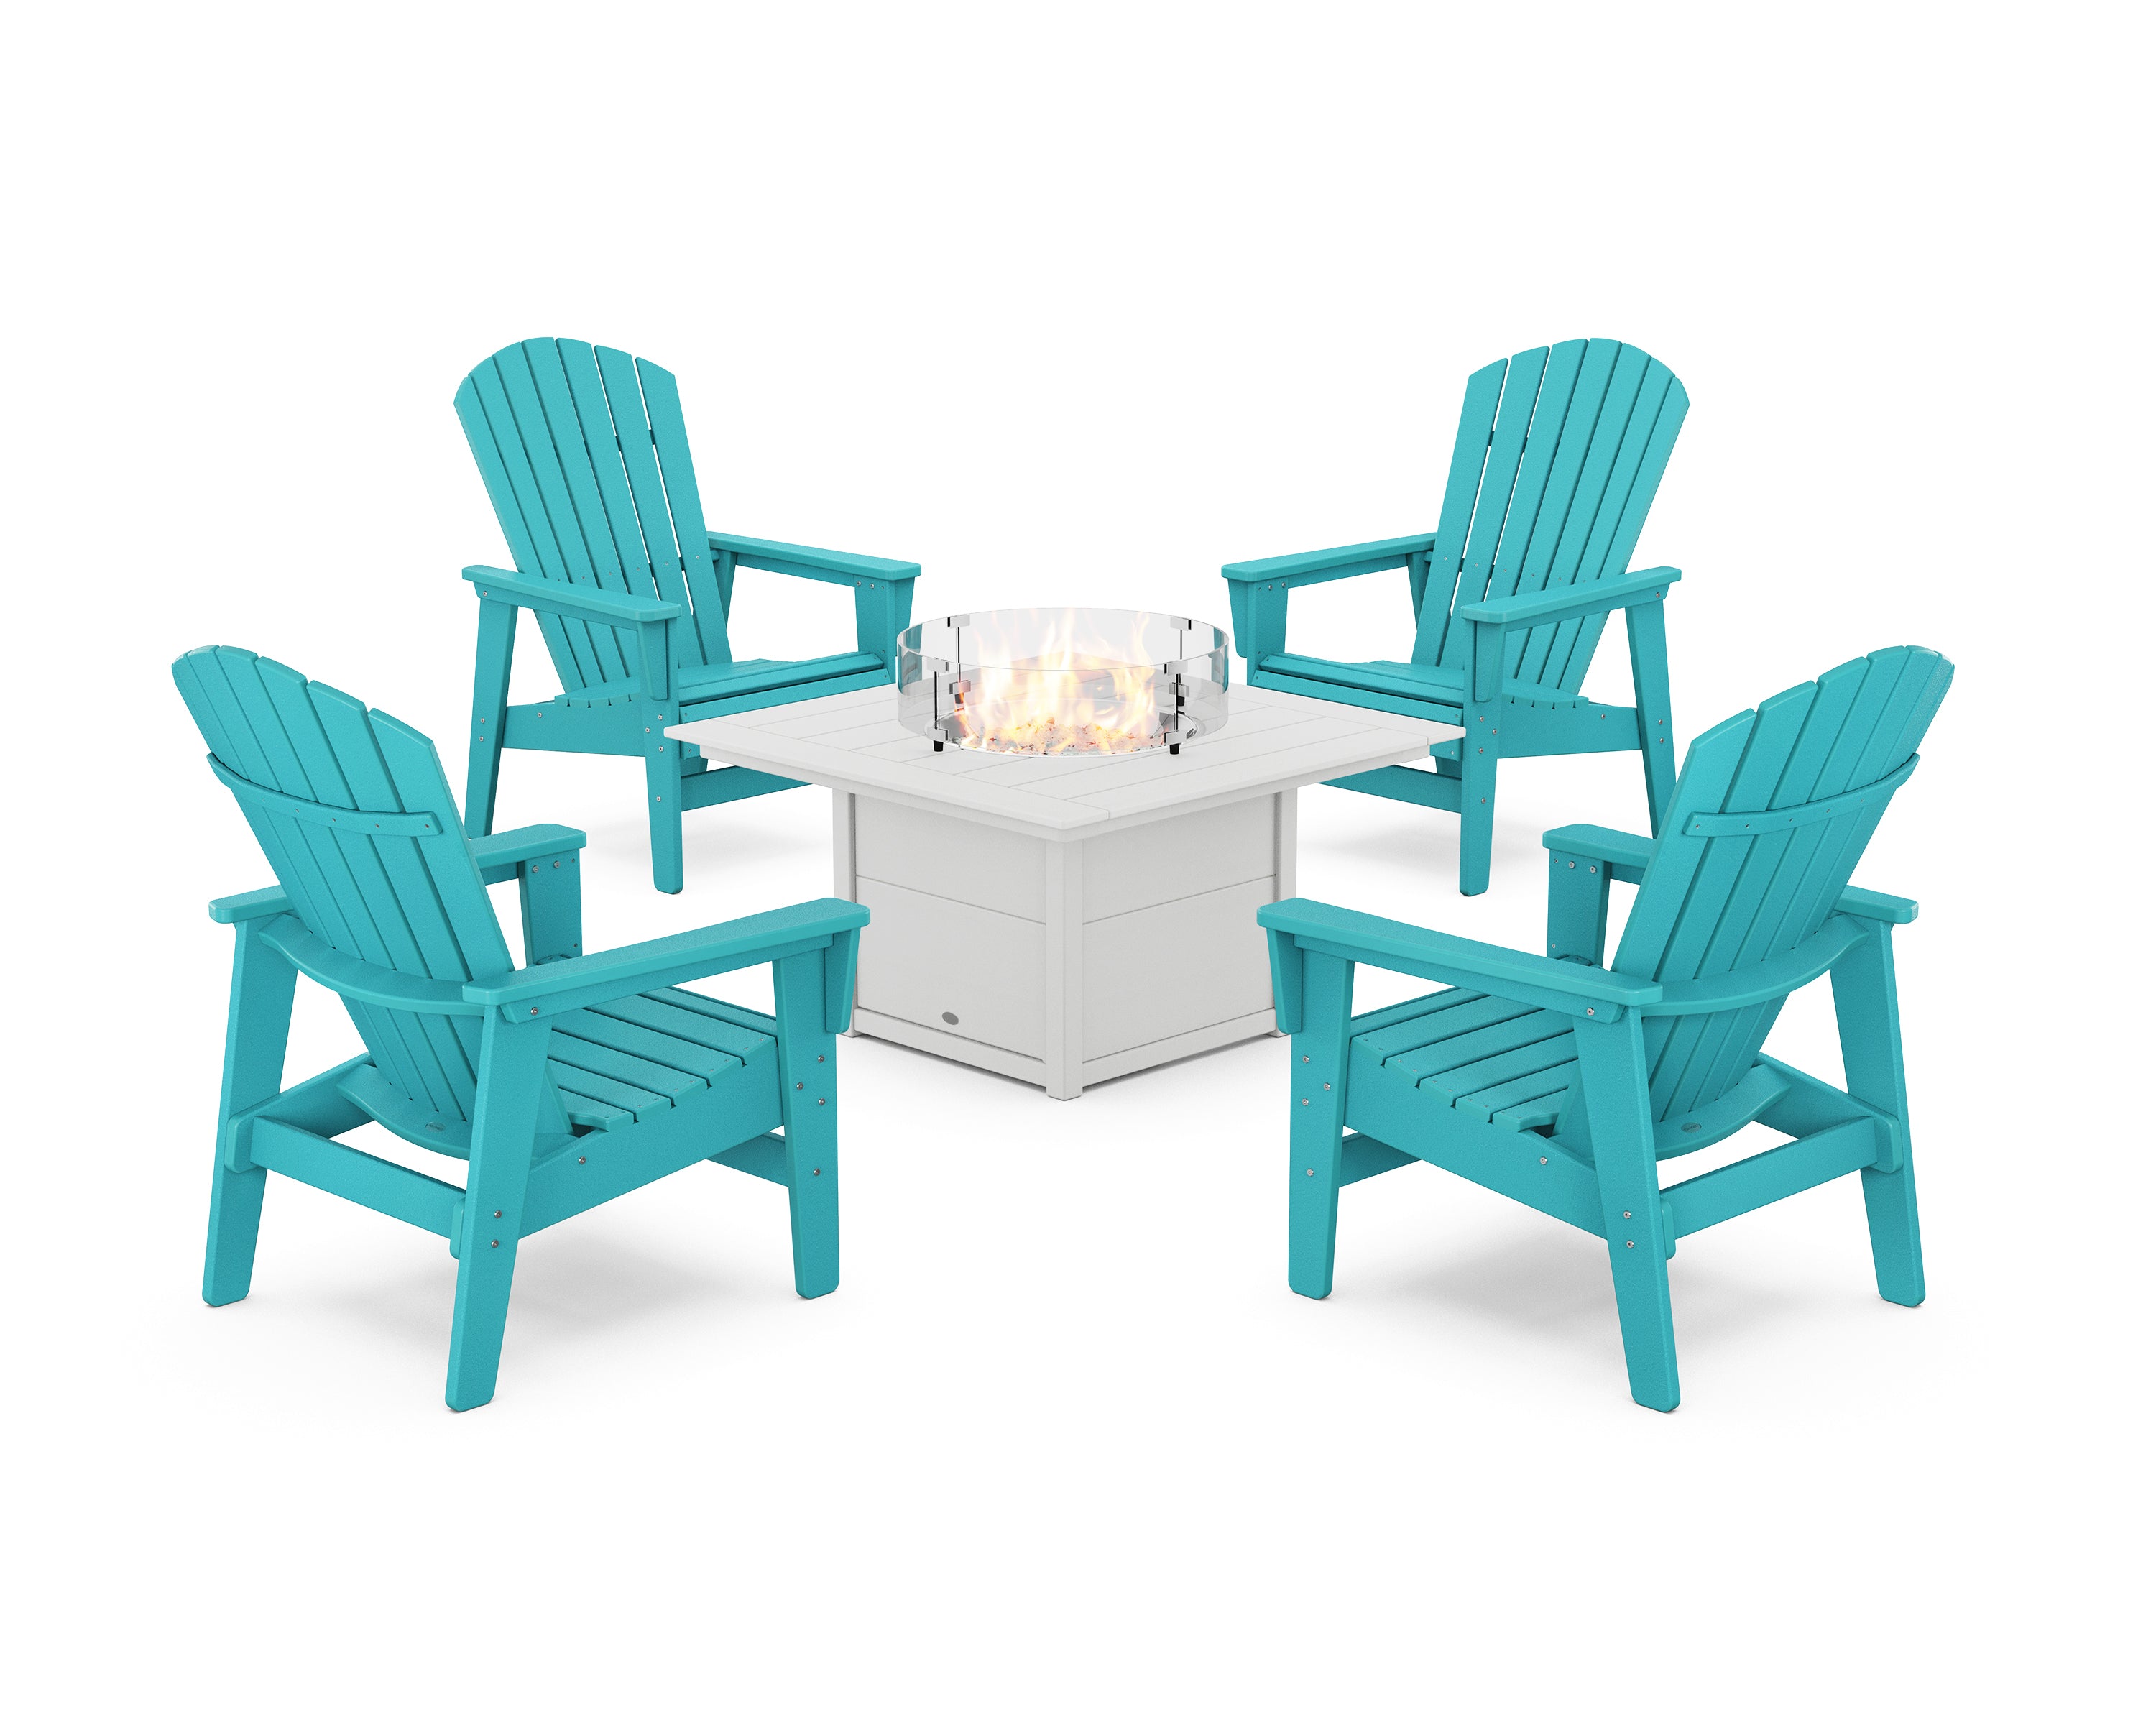 POLYWOOD® 5-Piece Nautical Grand Upright Adirondack Conversation Set with Fire Pit Table in Aruba / White